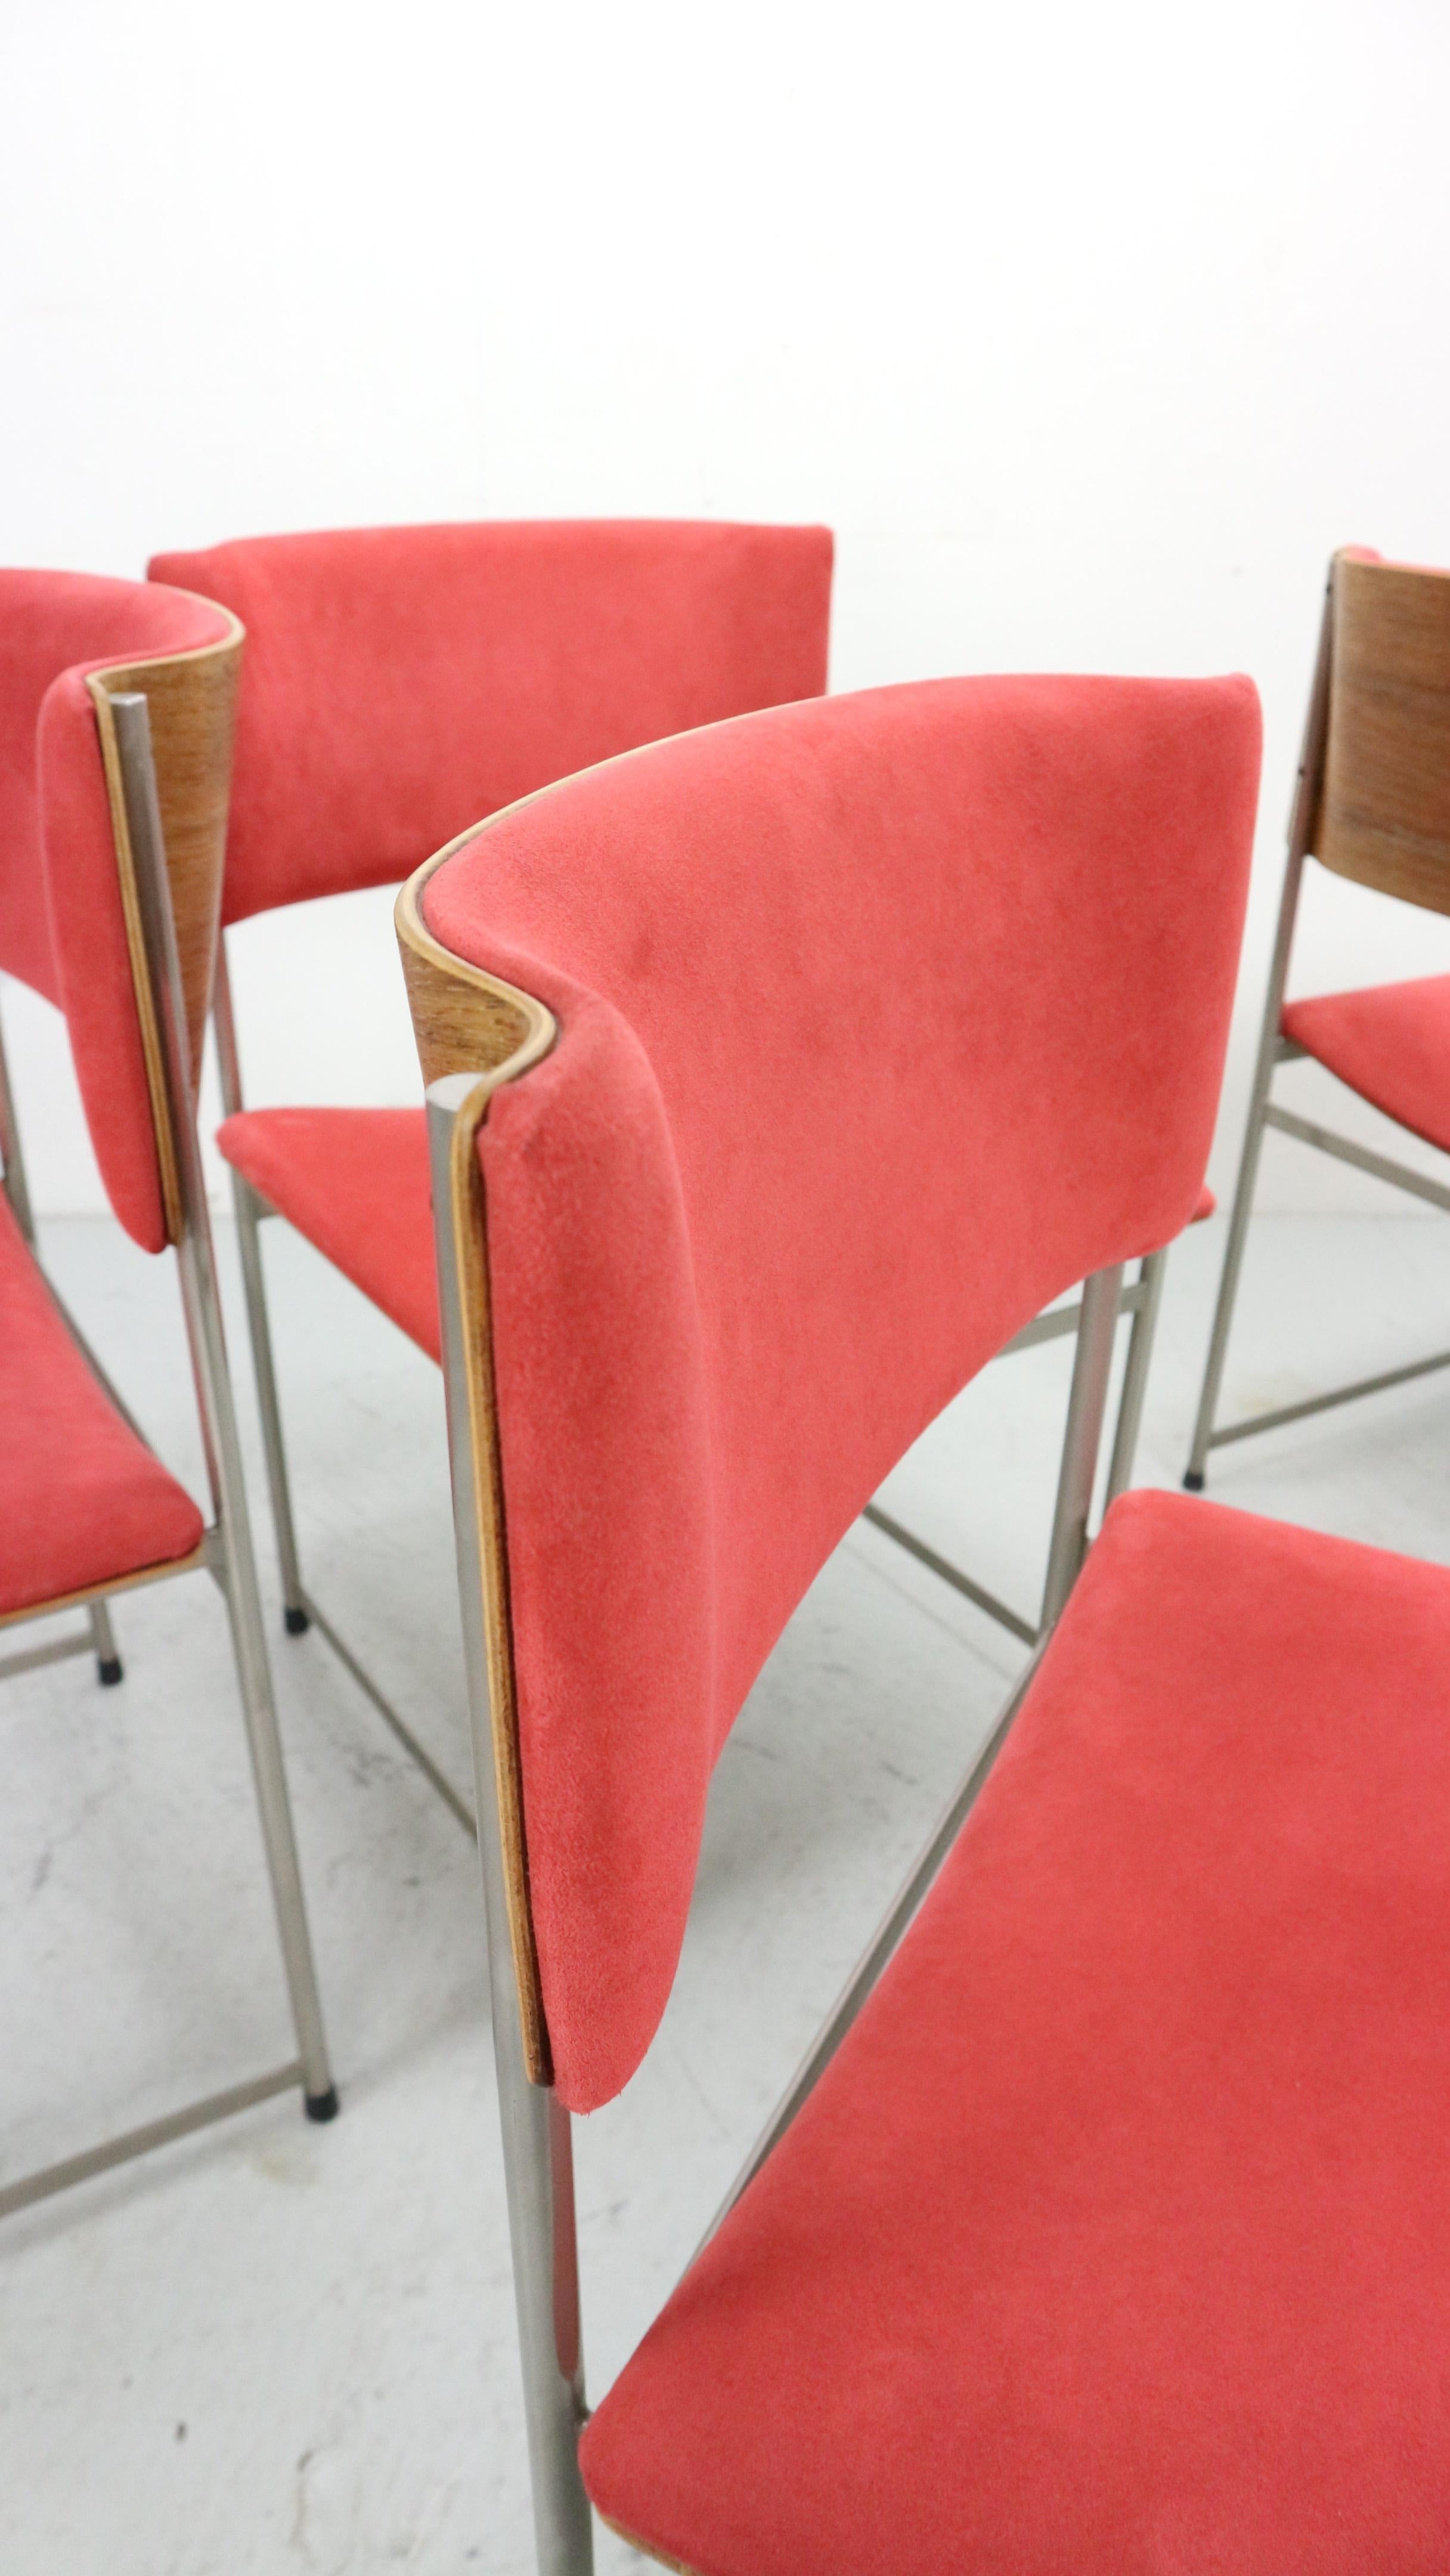 Set of 4 SM08 dining chairs by Cees Braakman for Pastoe, Netherlands 1960s For Sale 11